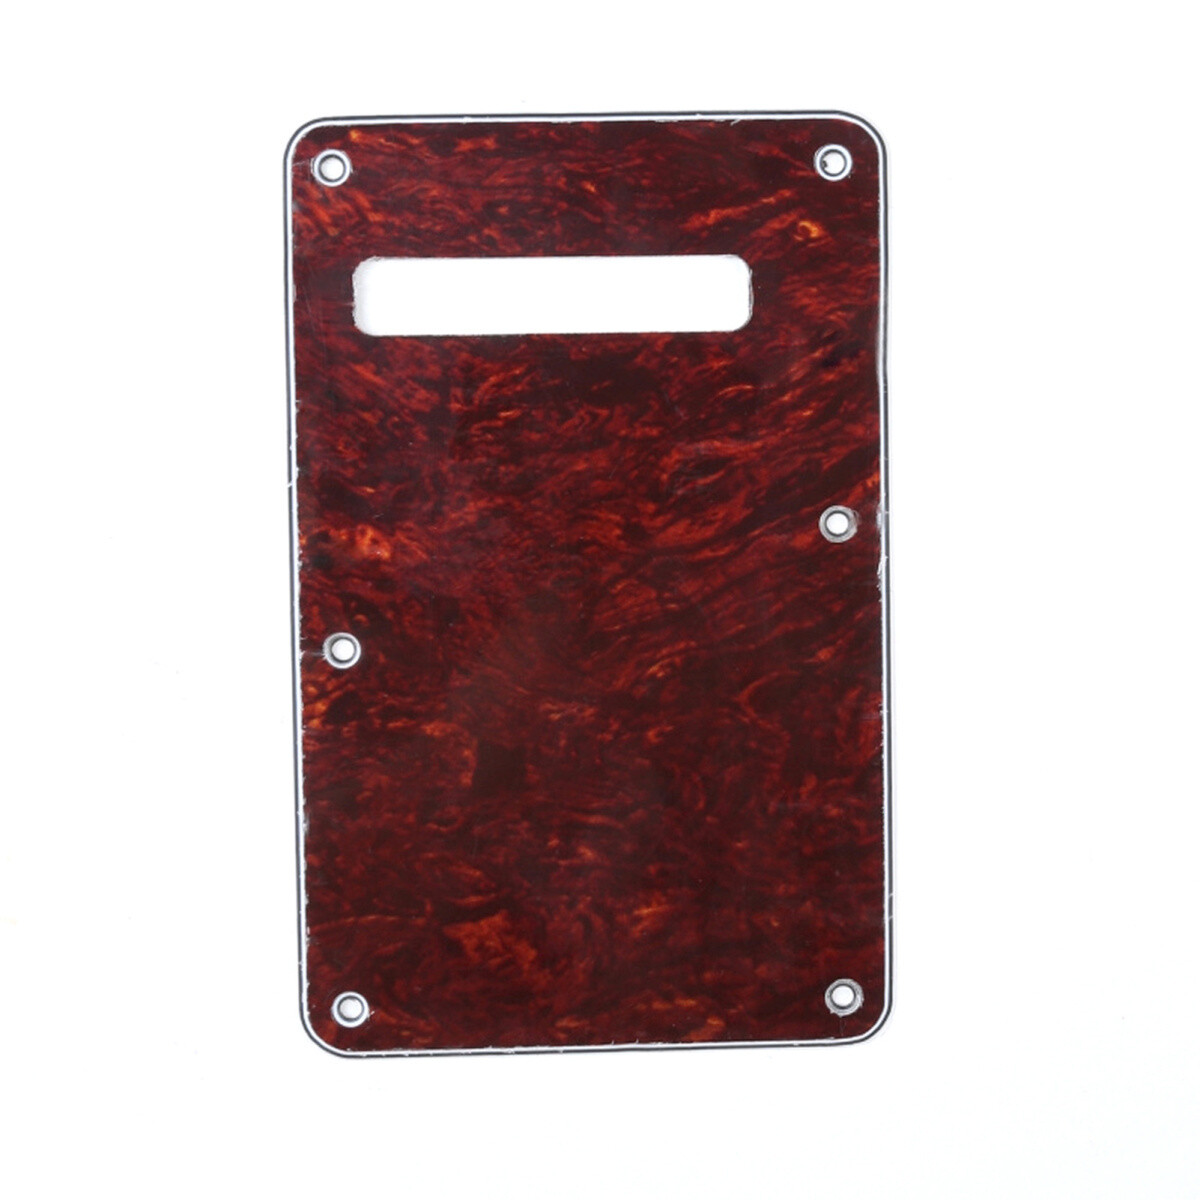 Brio Red Tortoise Modern Style Back Plate Tremolo Cover 4 ply - US/Mexican Fender®Strat® Fit